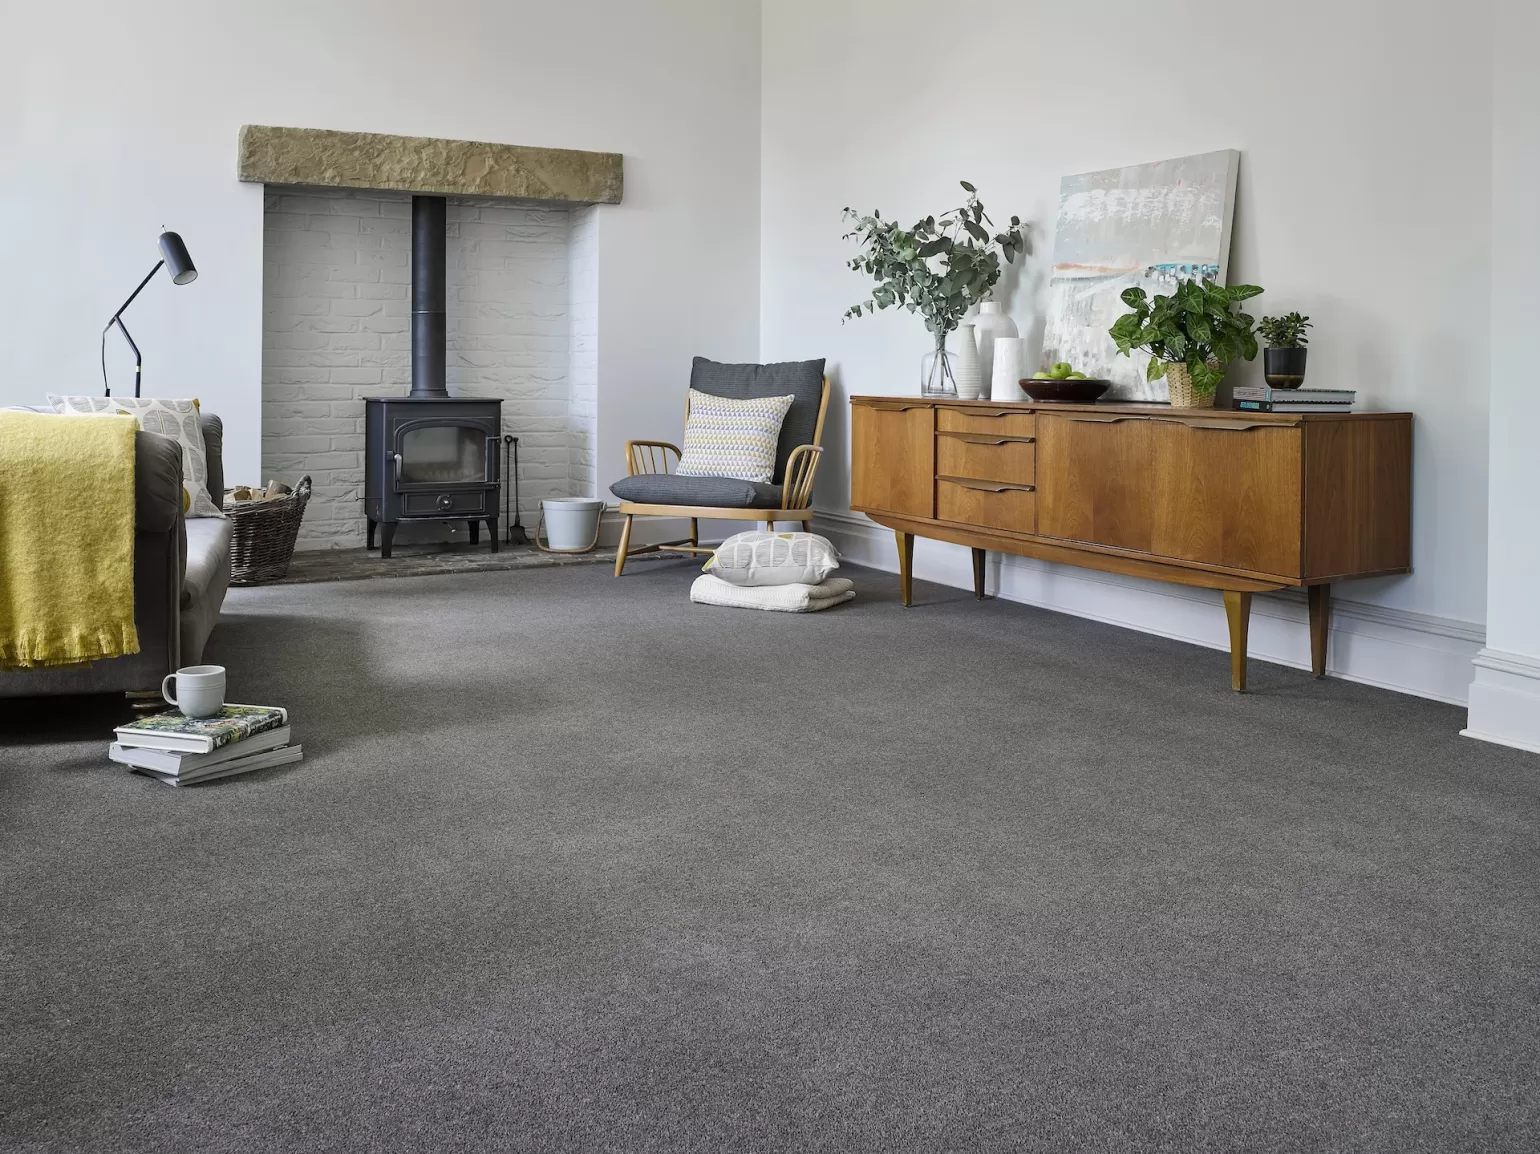 As an 80/20 wool mix, Burford Twist is a subtle heather range that comes in contemporary neutral shades. Available in both 4 and 5 metre widths.
